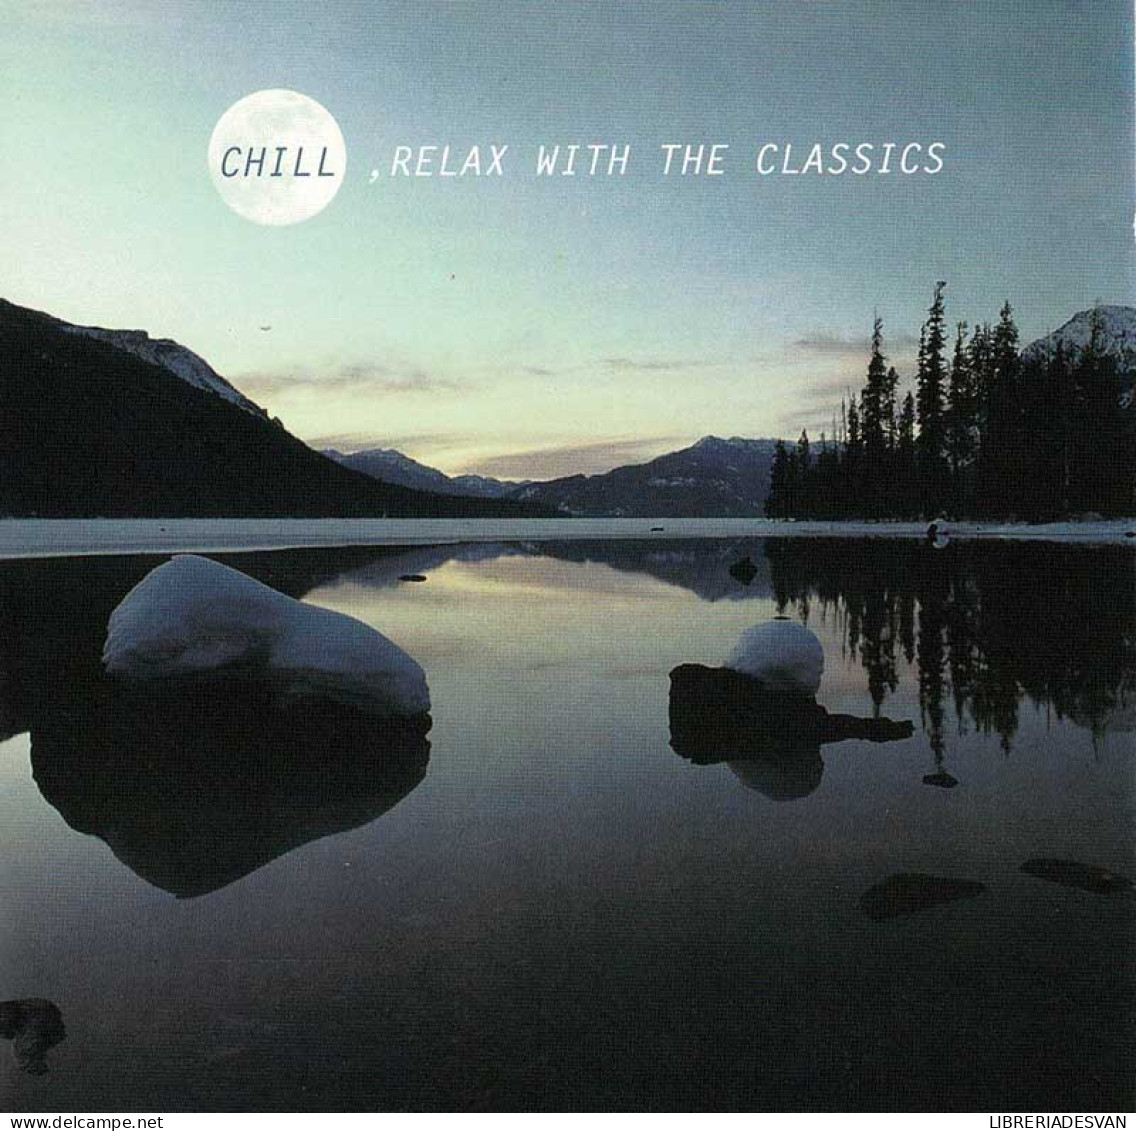 Chill, Relax With The Classics. CD - Classical